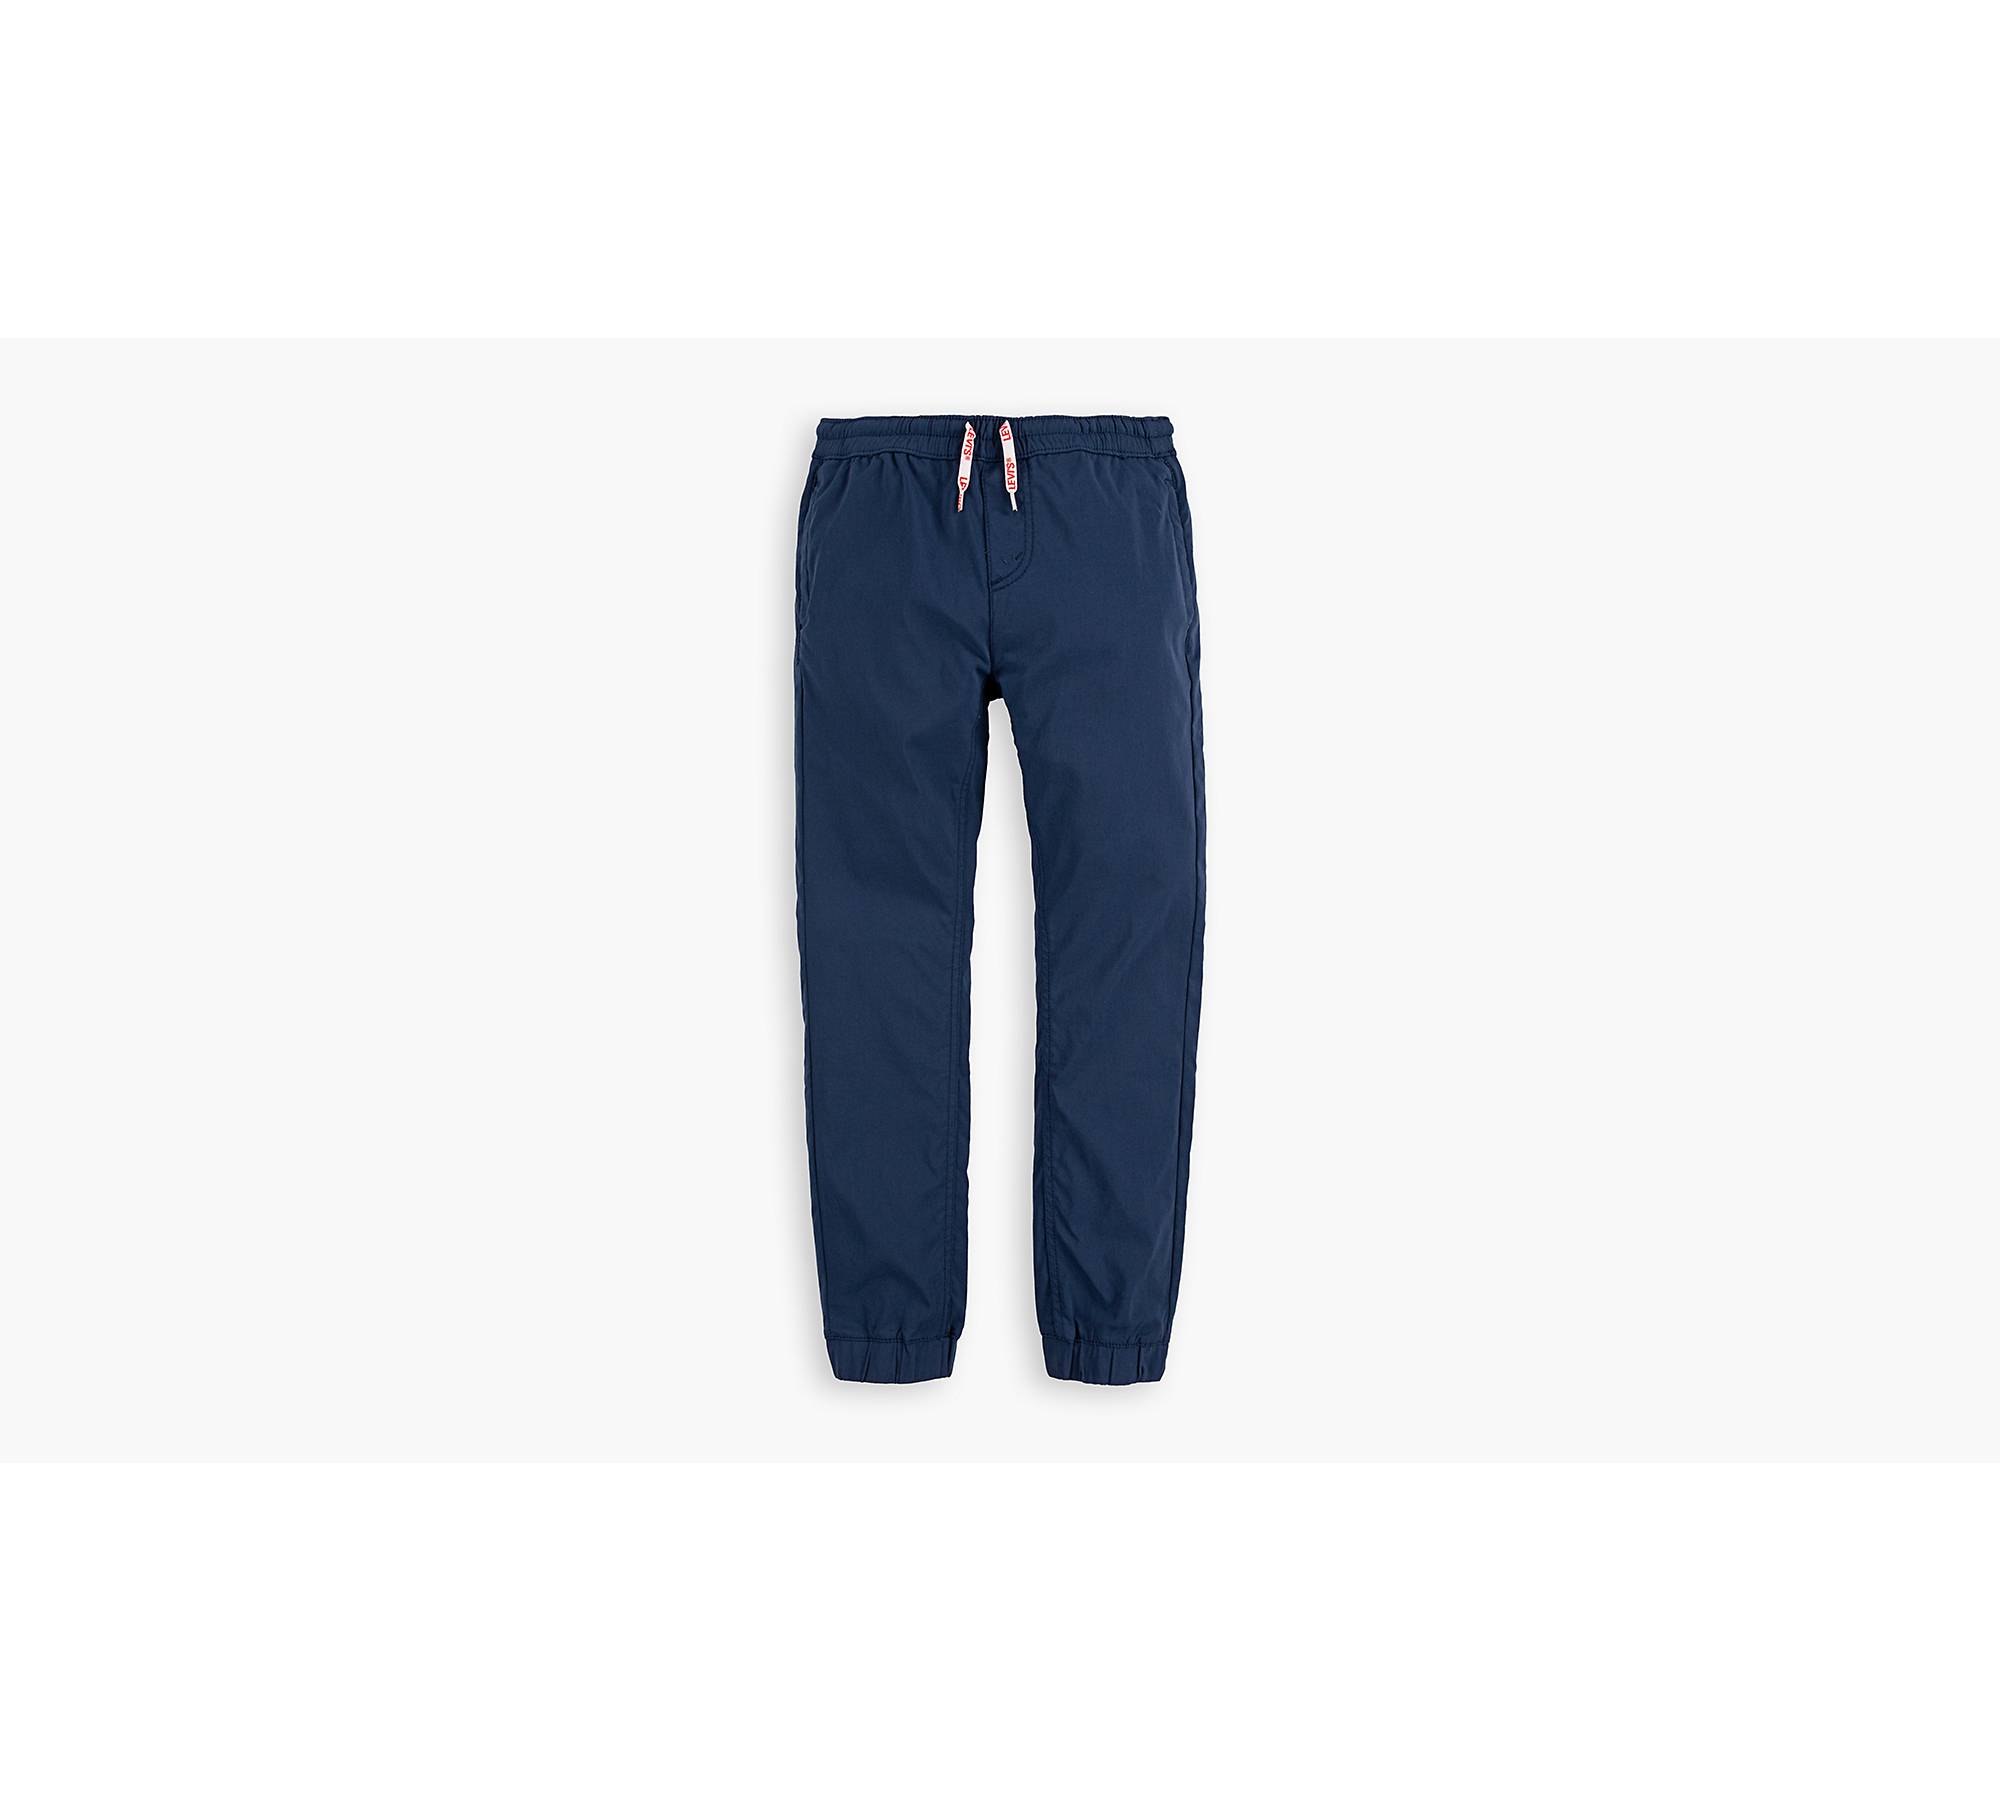 Hollister Sweatpants Blue Size XS - $8 (82% Off Retail) - From Liliana